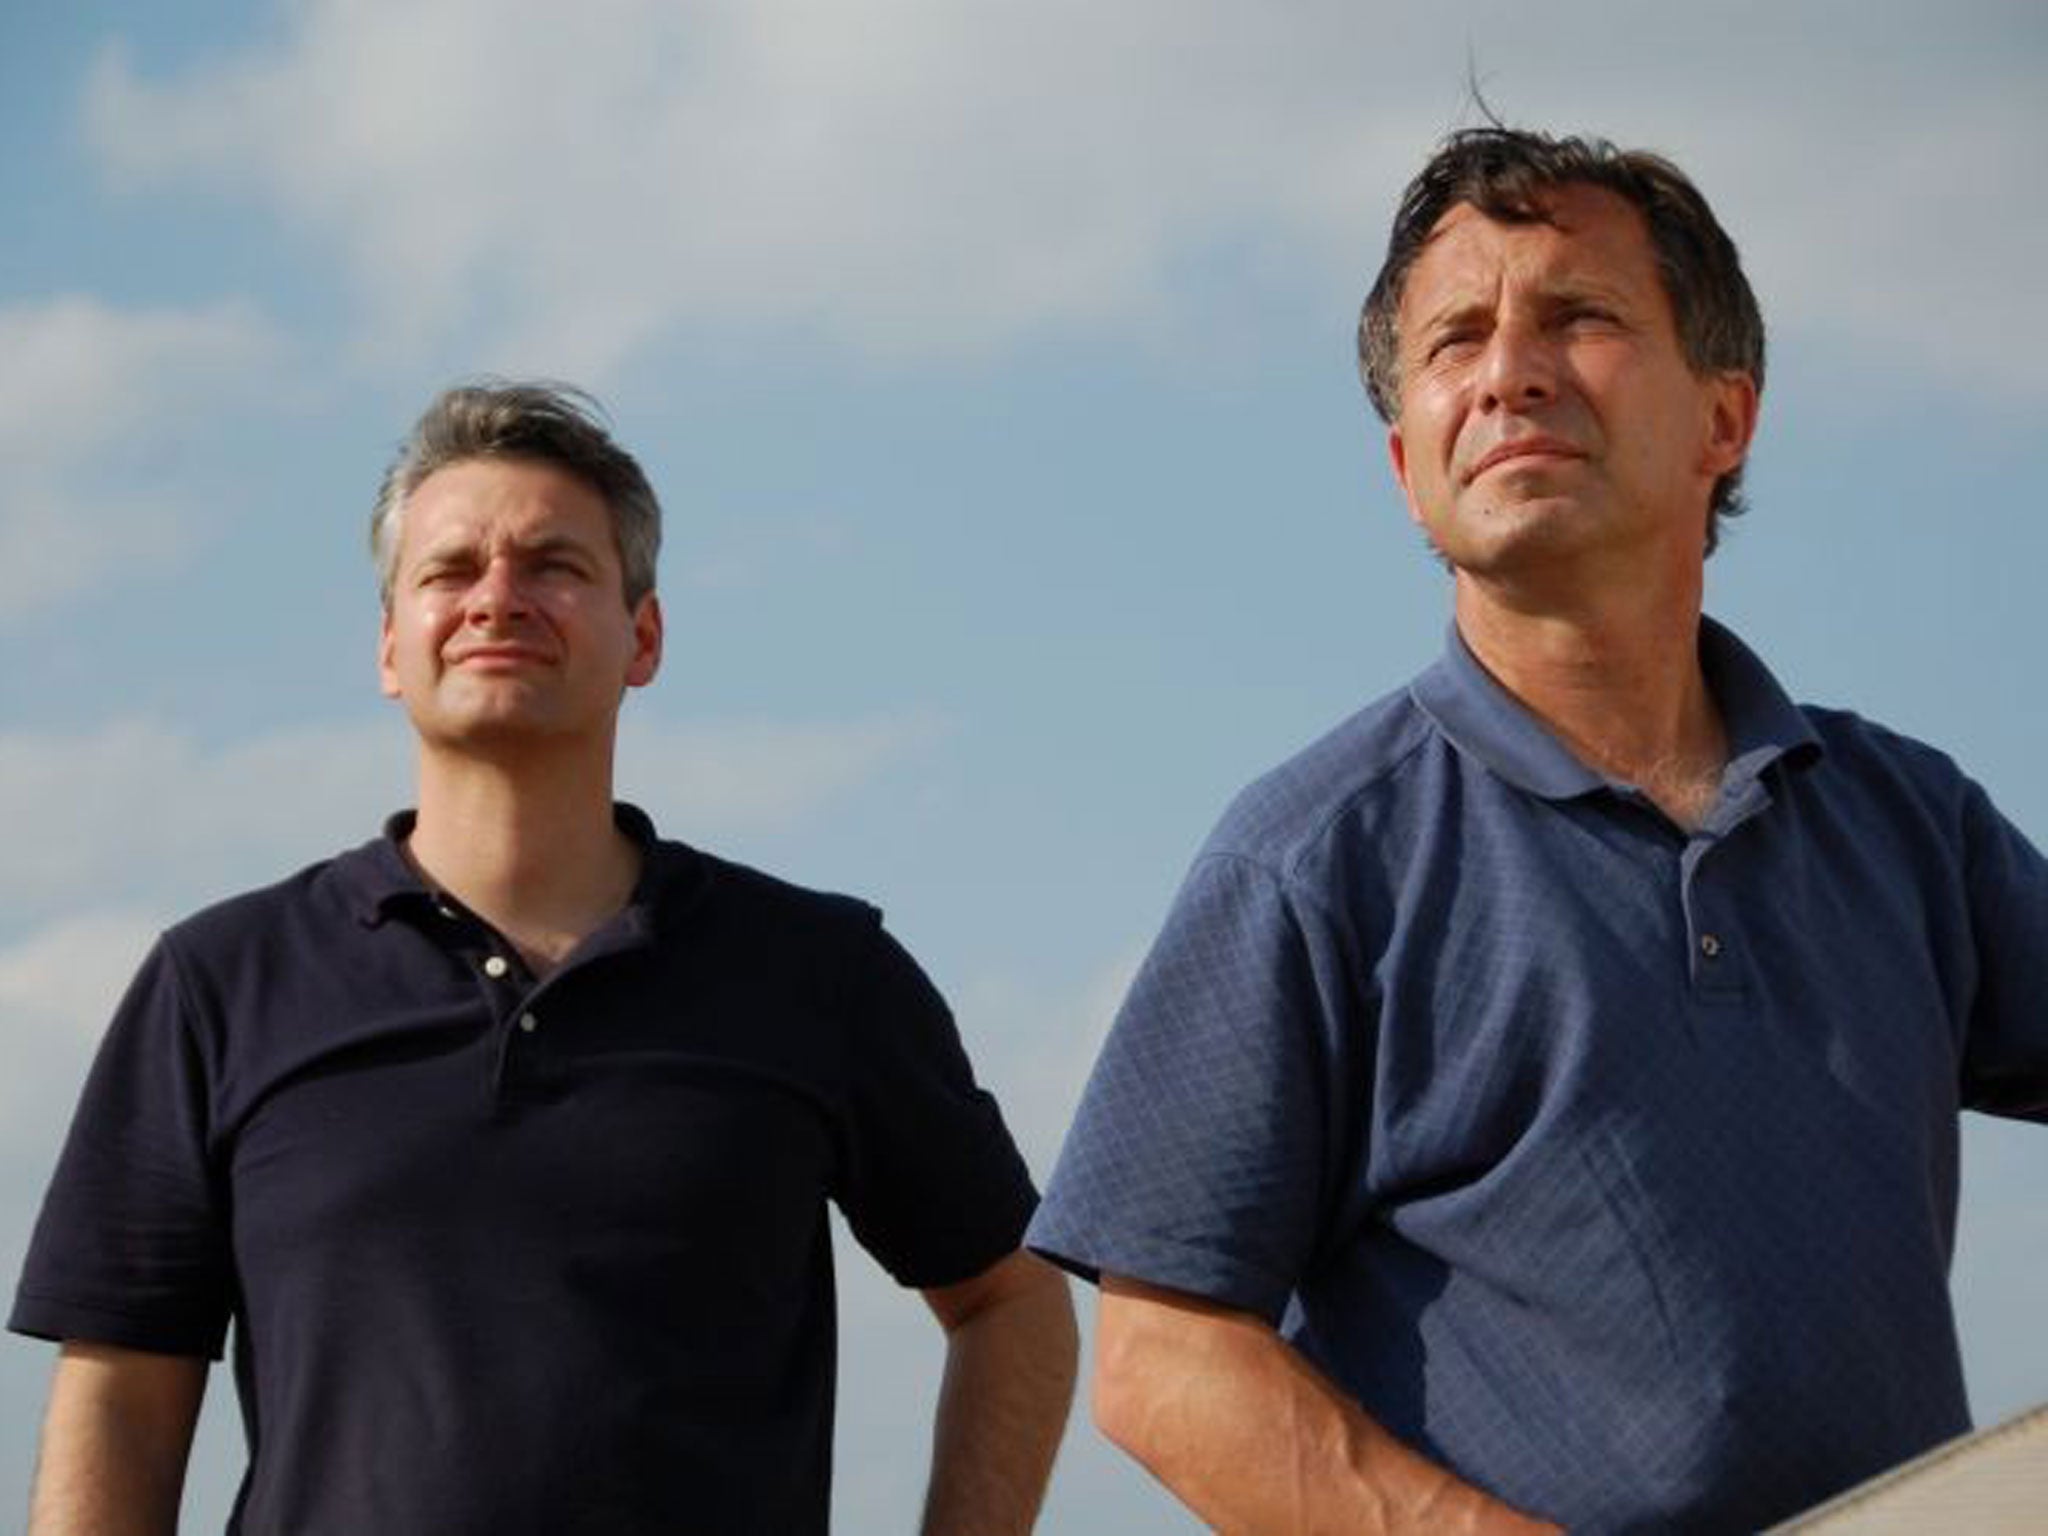 Carl Young and Tim Samaras watching the sky.